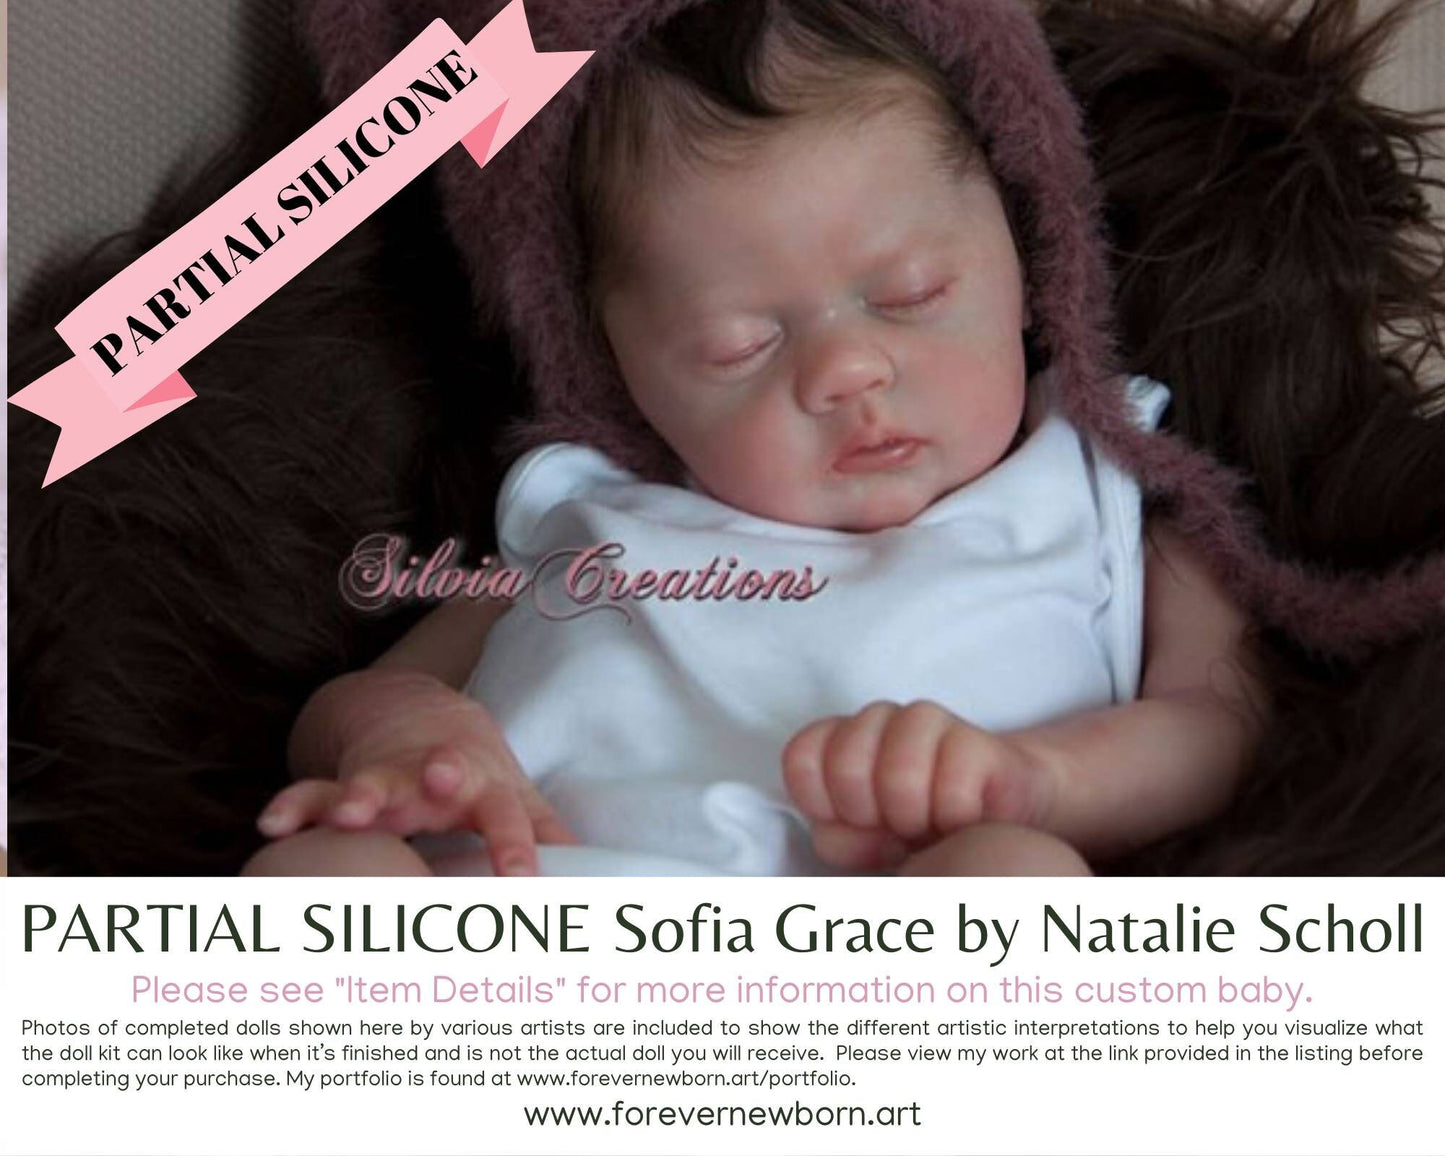 SiLiCoNe BaBy Sofia Grace by Natalie Scholl (18"+ Full Limbs) with cloth body. Extended Processing Time May Be Required. ASK FIRST!